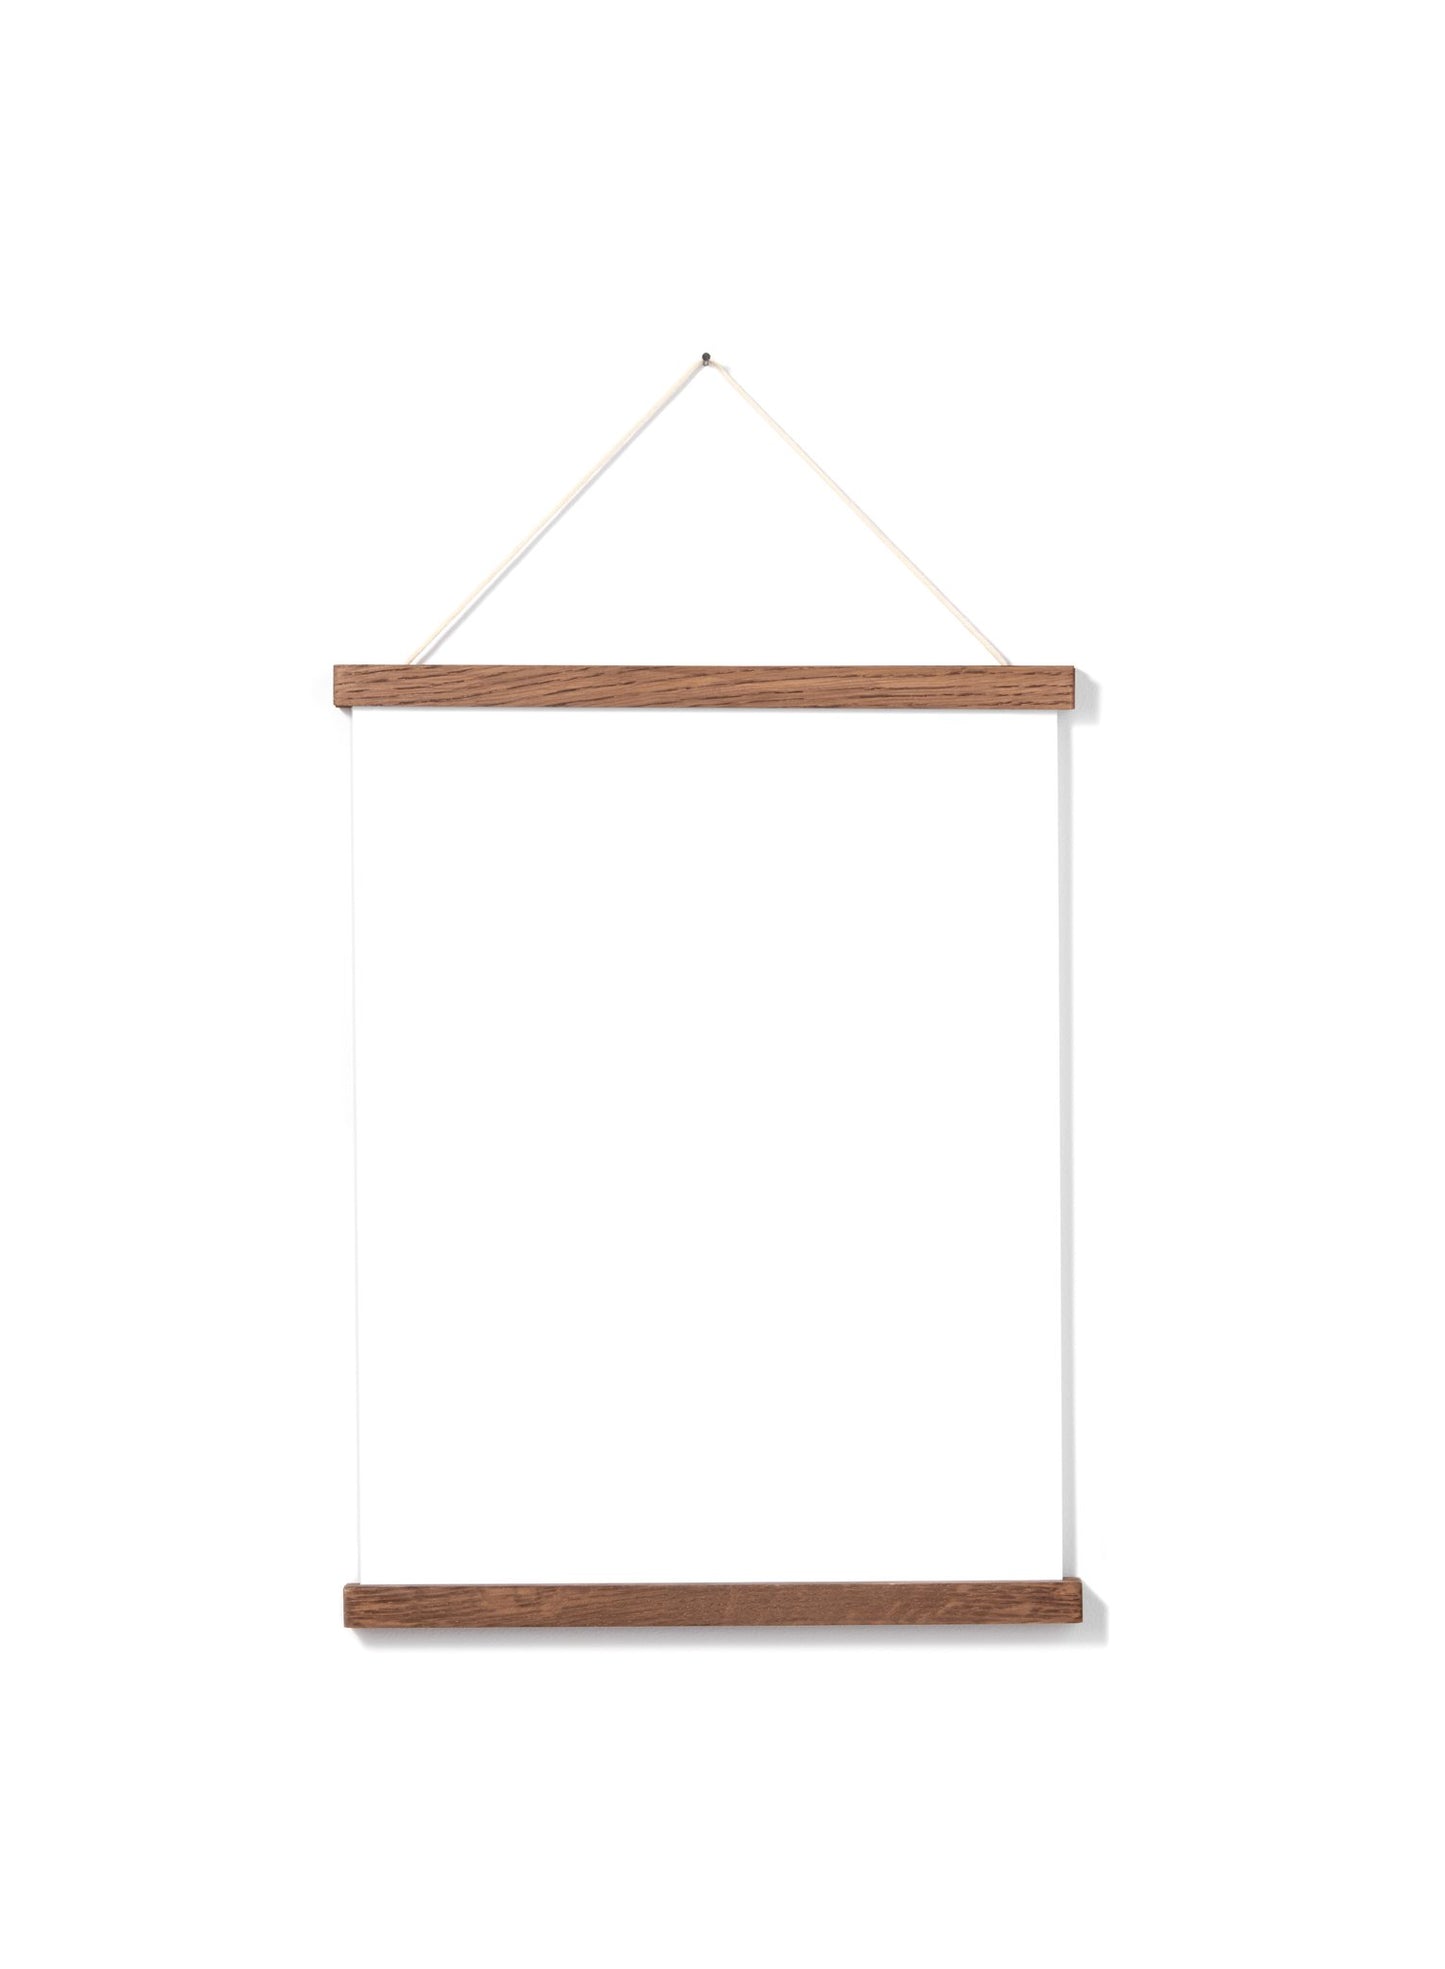 Scandinavian dark oak poster wall hanger by Opposite Wall - Front of the poster hanger - Size 12 inches